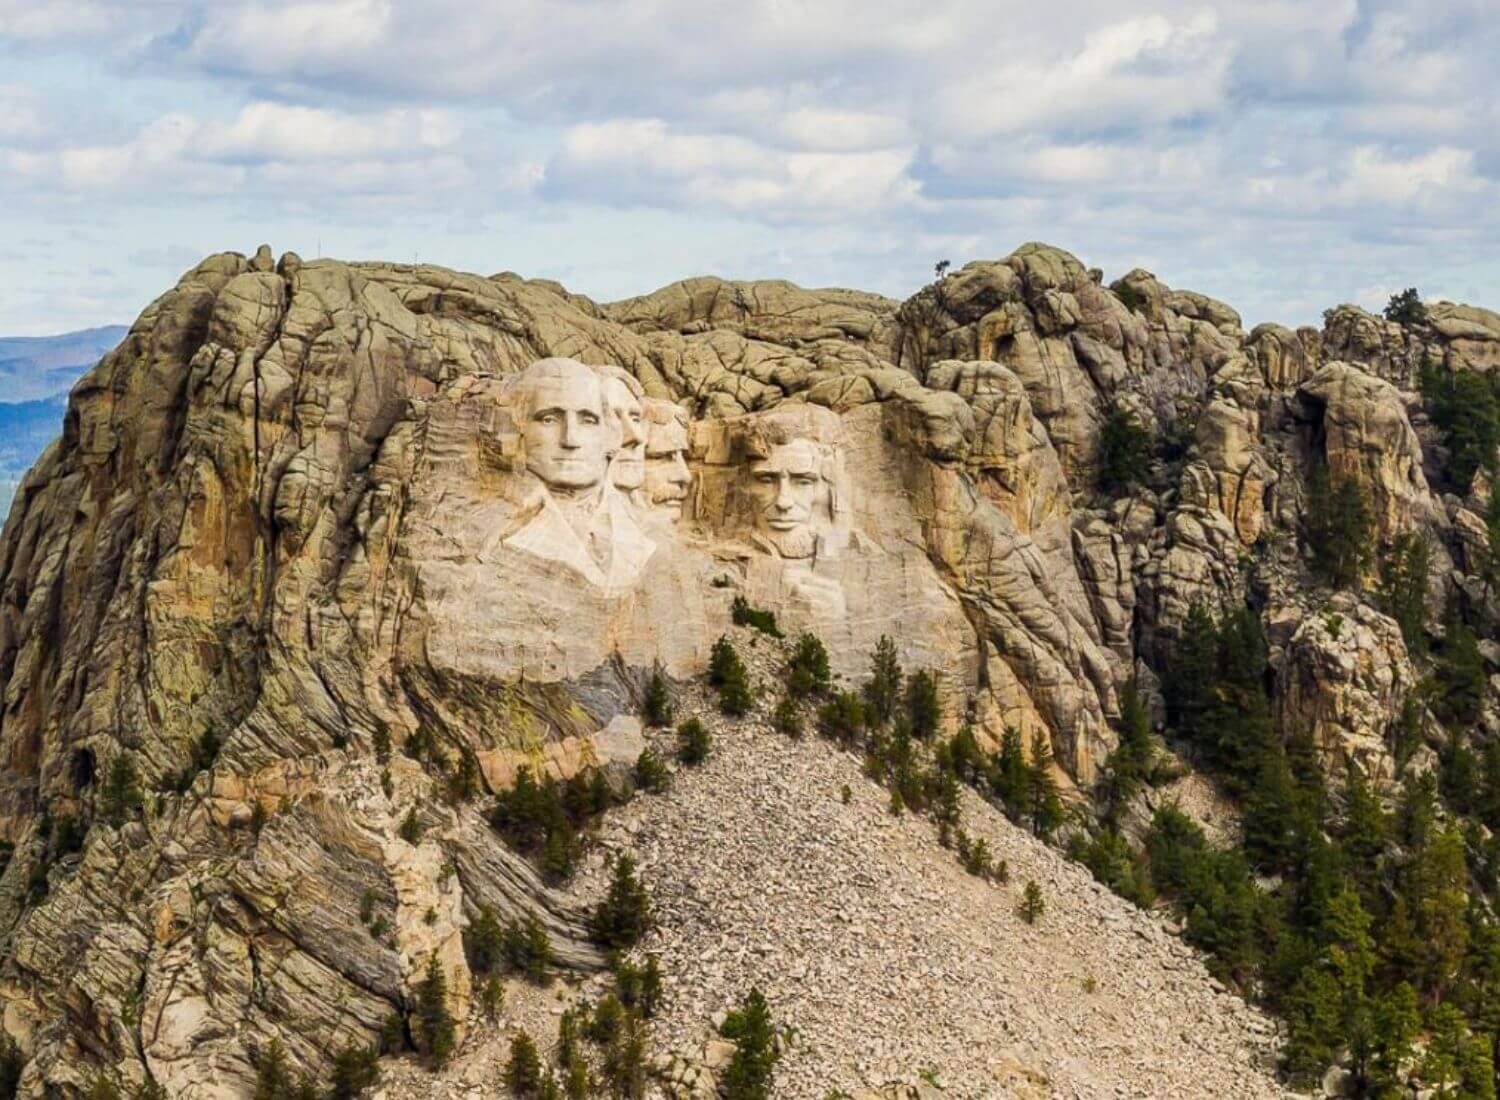 Is There An Inaccessible Secret Chamber In Mount Rushmore?